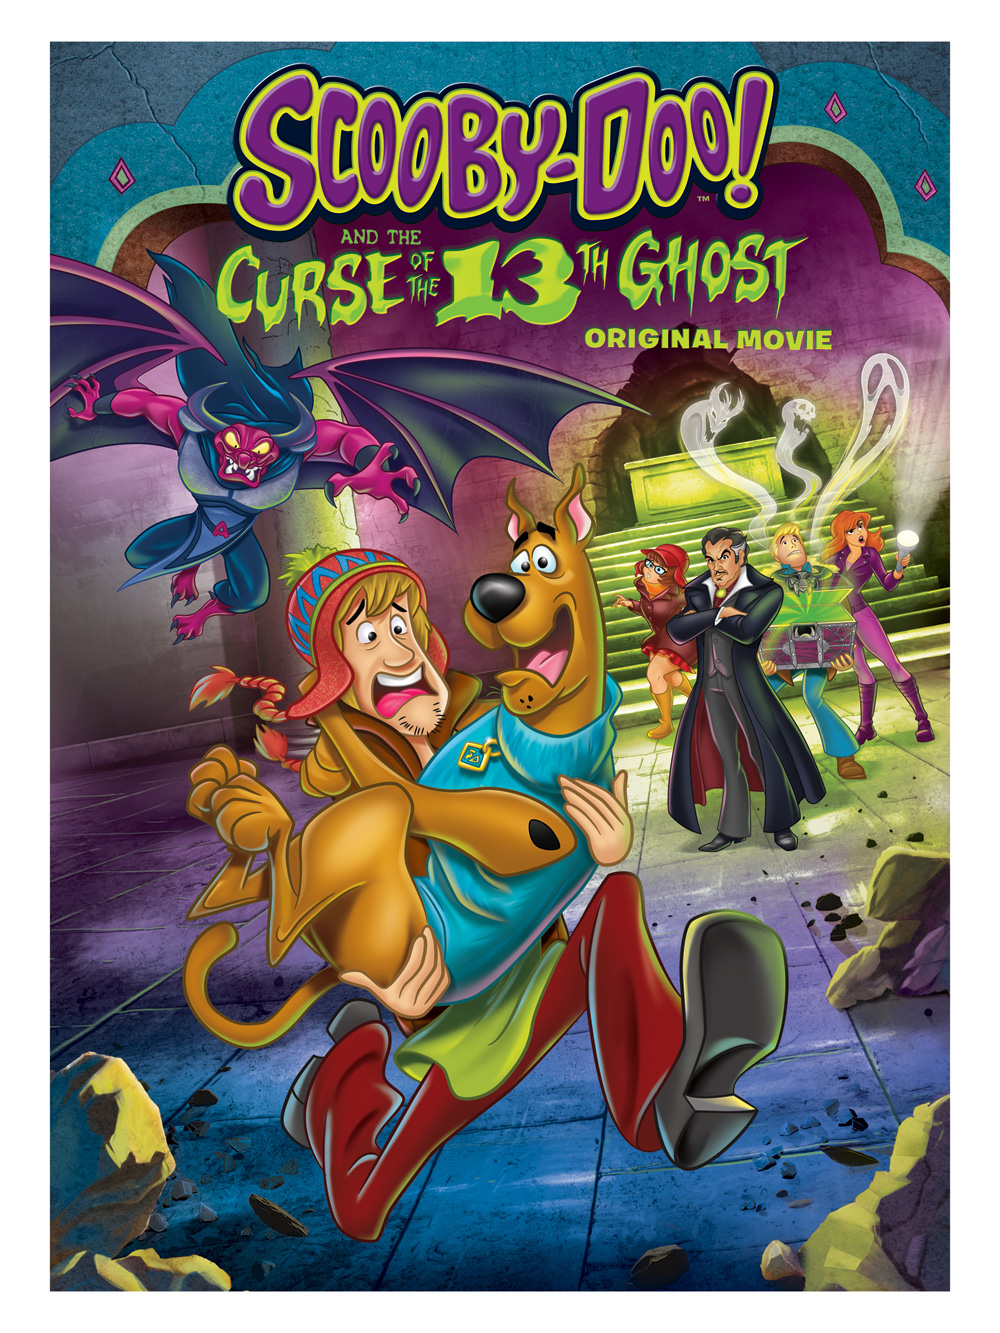 Stiahni si Filmy s titulkama Scooby-Doo! and the Curse of the 13th Ghost (2019)[WebRip][1080p] = CSFD 74%